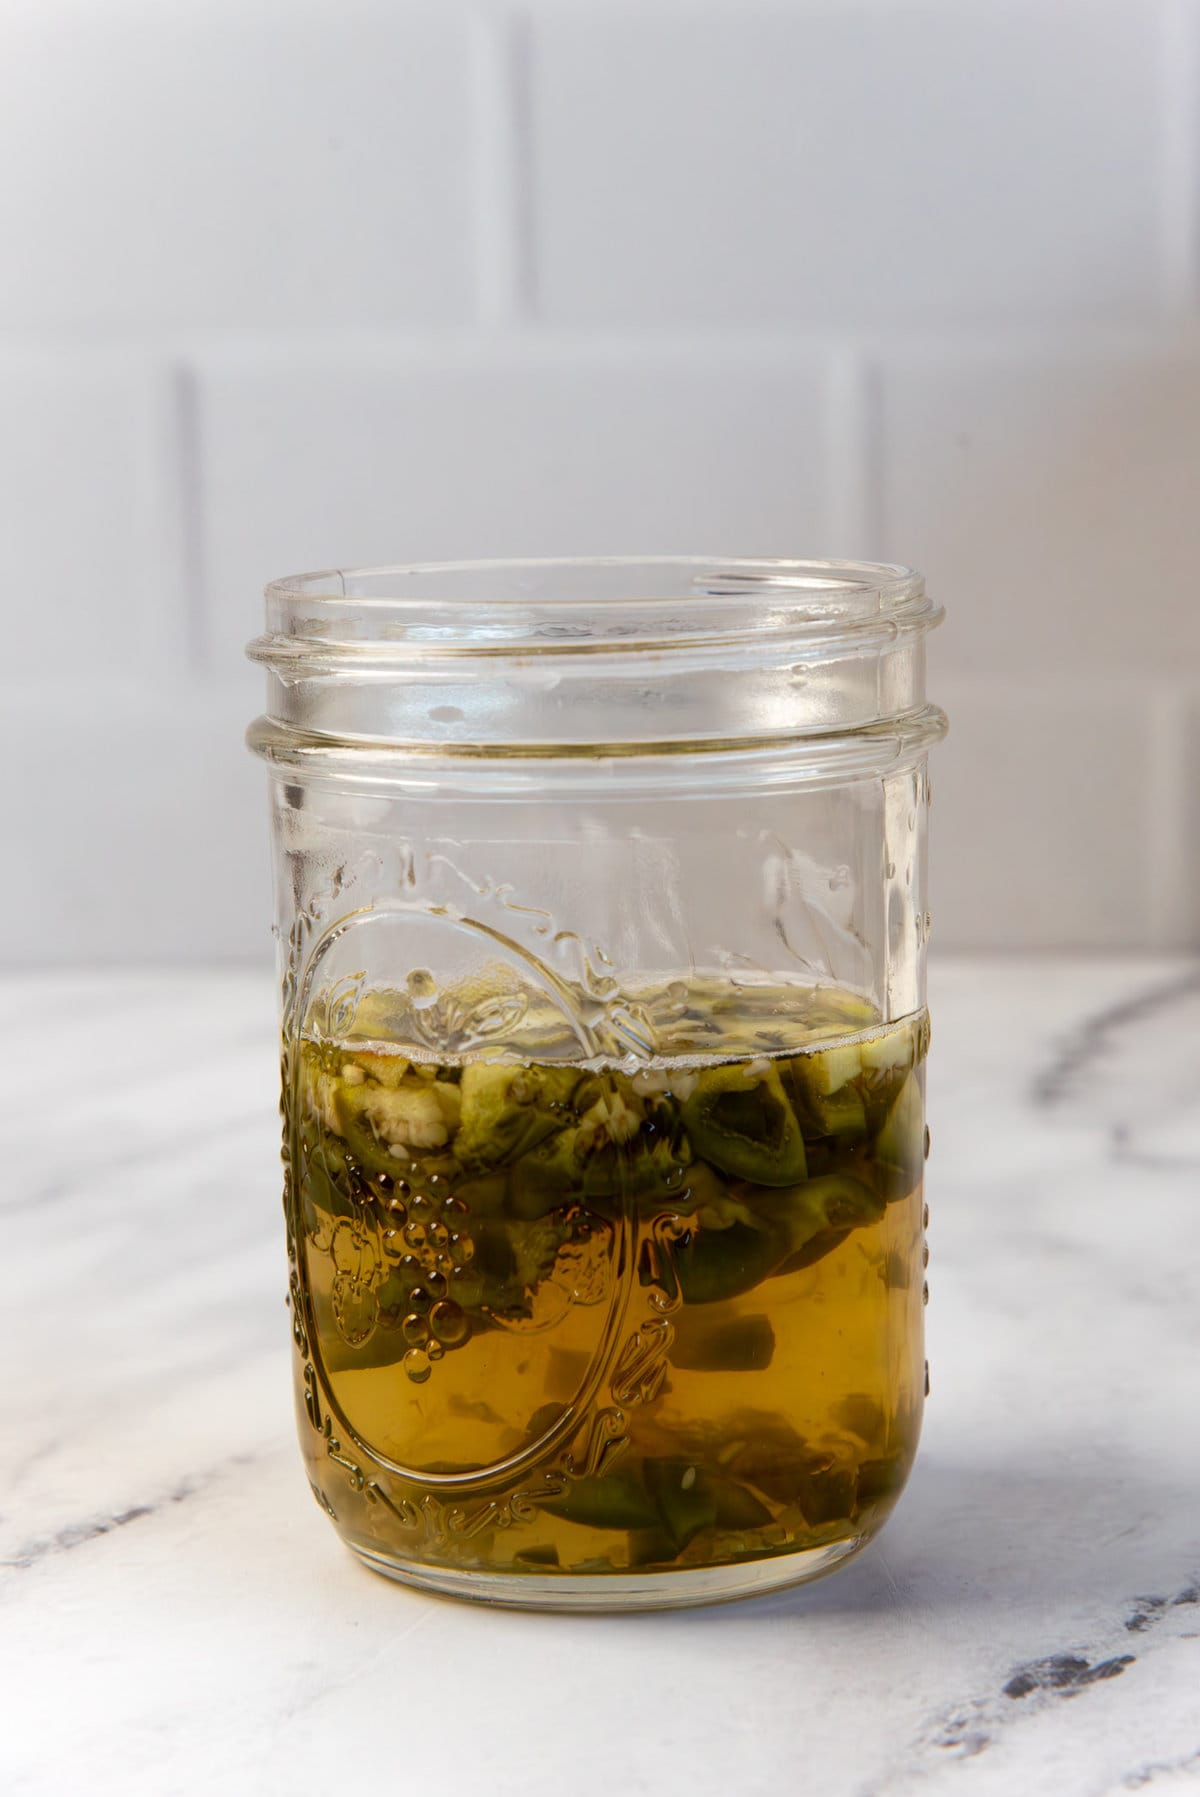 Jalapeno and gold tequila infused in a ball mason jar.